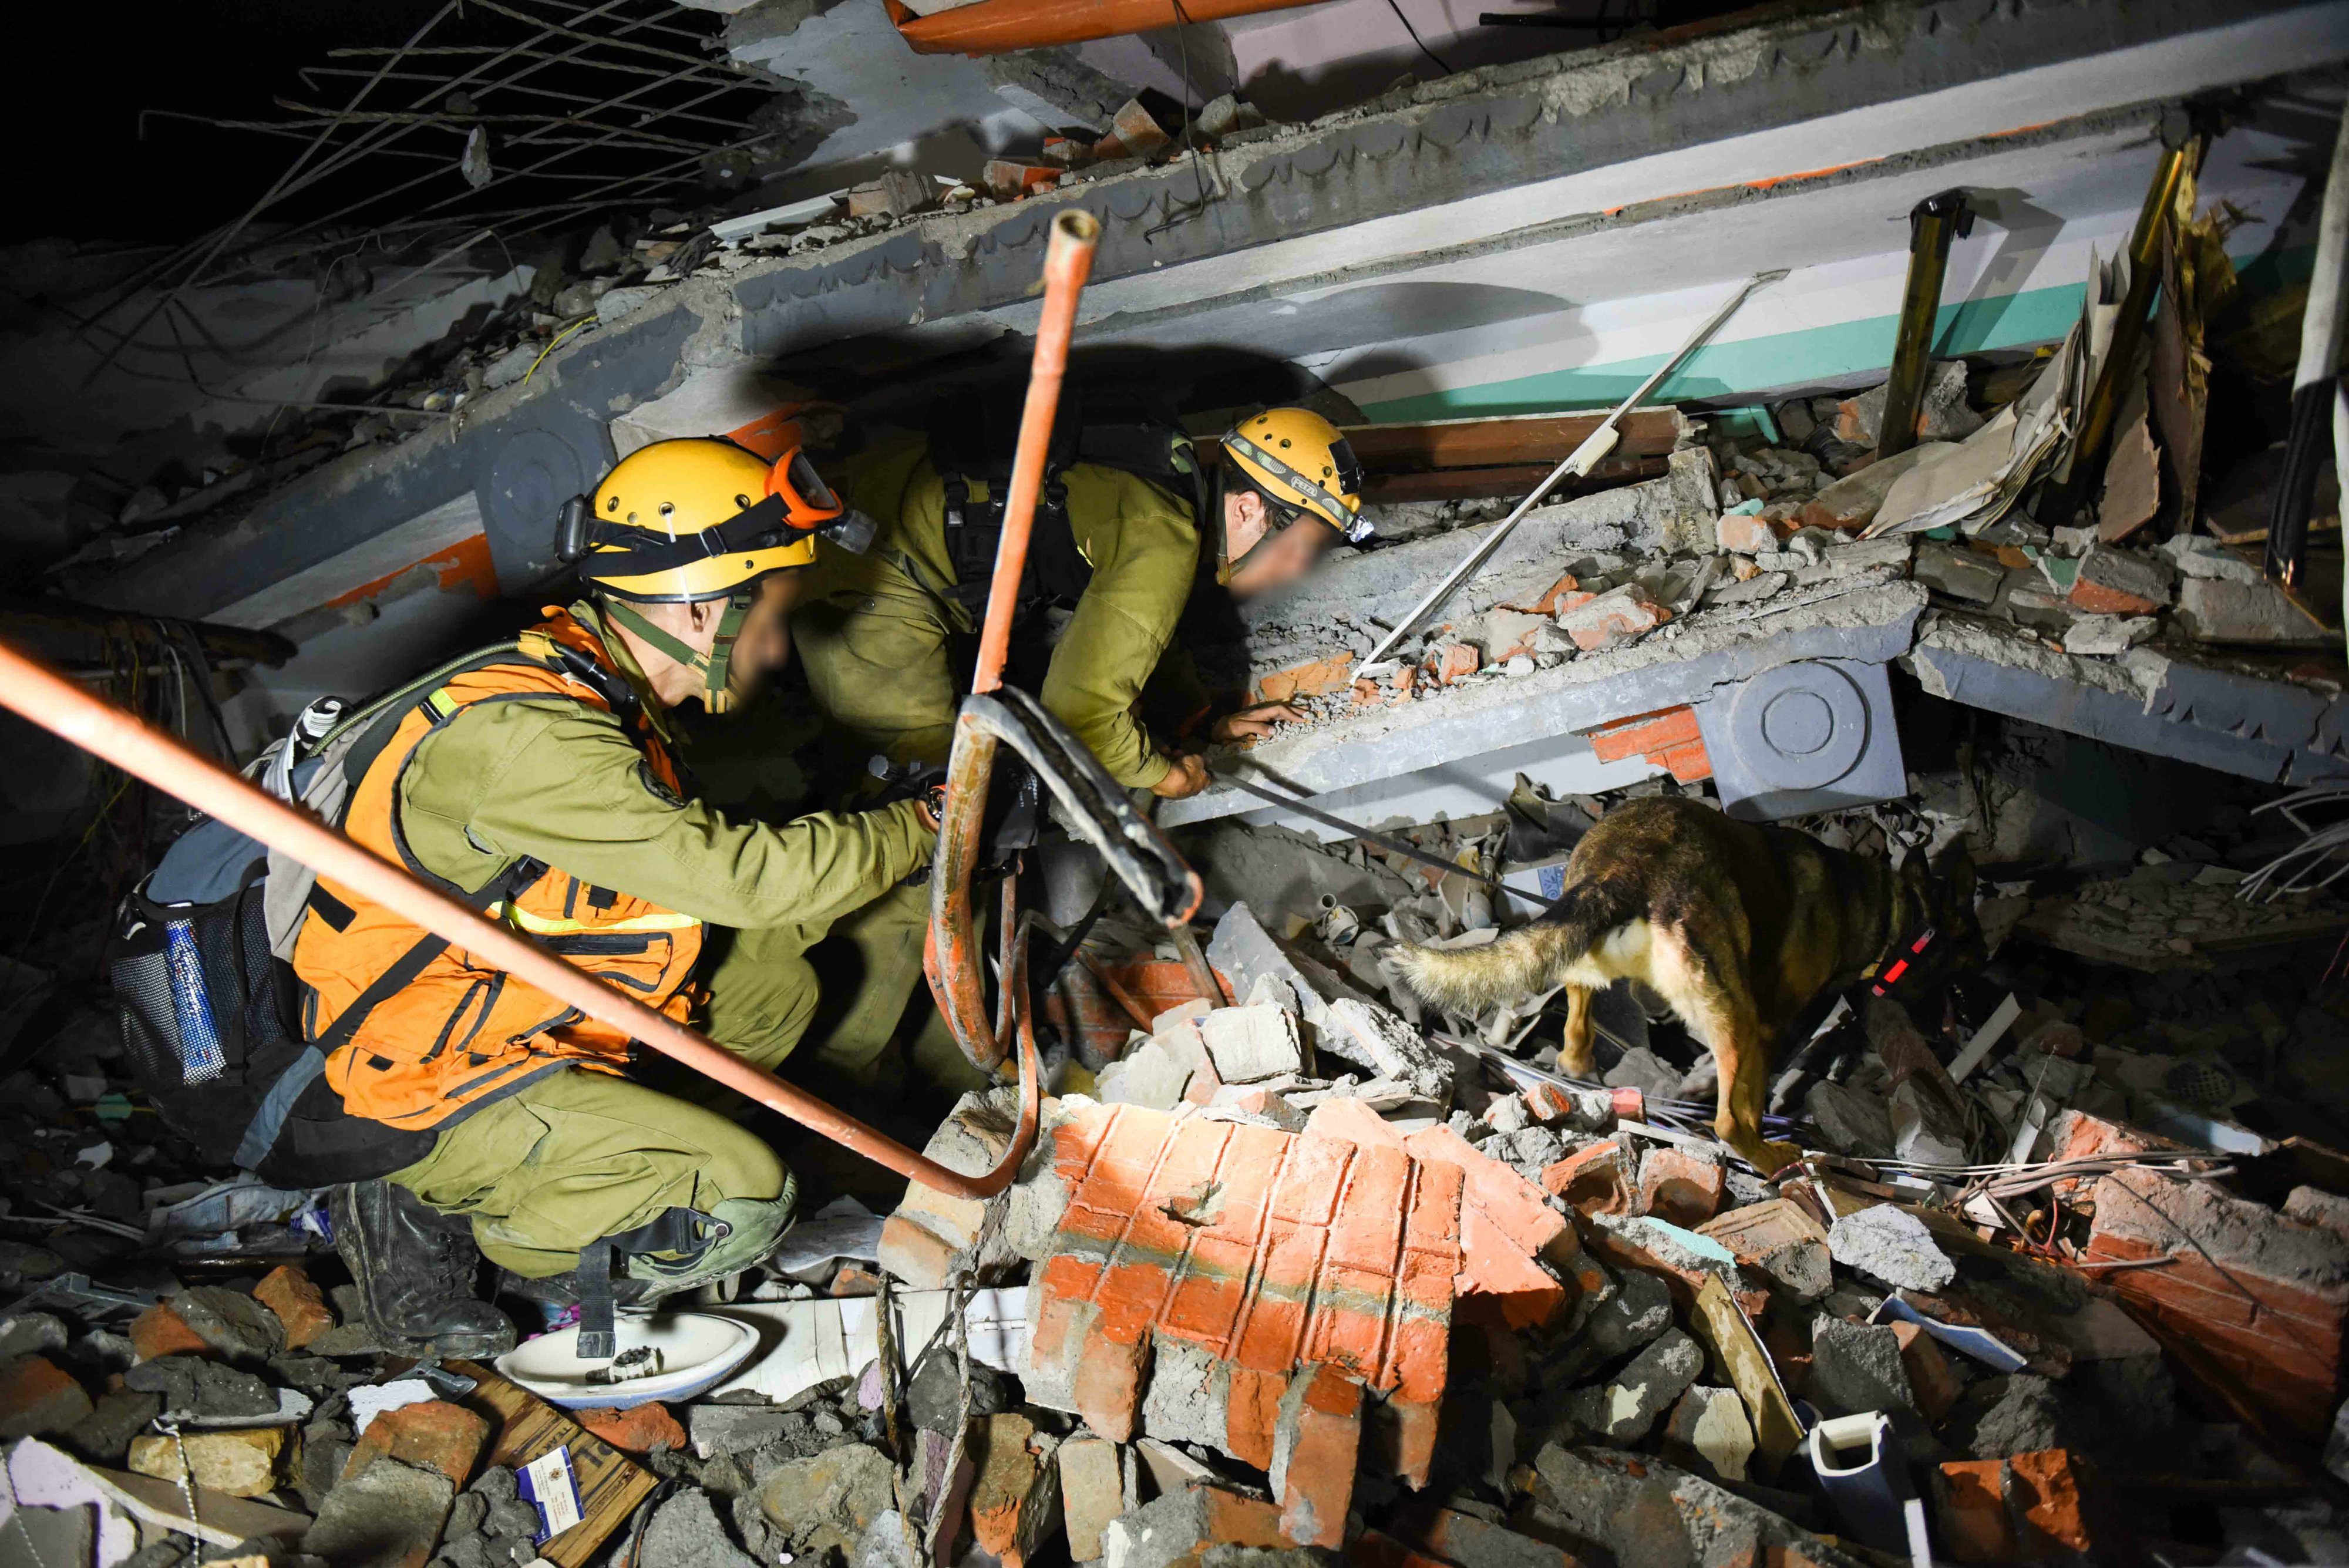 Israeli soldiers during rescue attempts of injured and trapped people from the ruins of buildings in Nepal. (IDF Spokesperson)